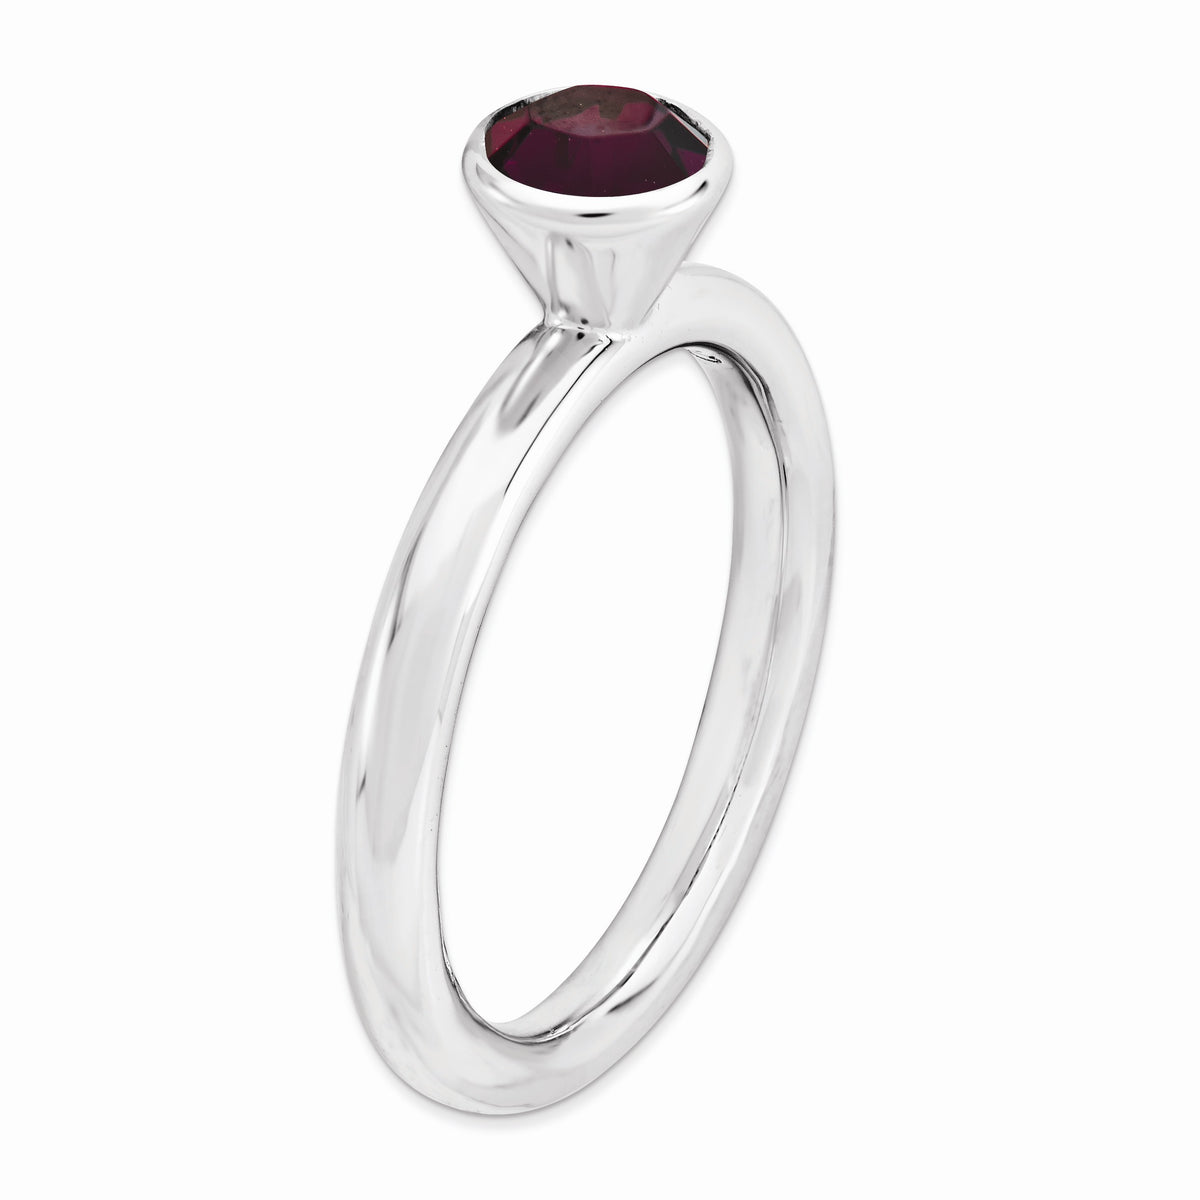 Alternate view of the Sterling Silver with 5mm Purple-Red Crystals Stackable Ring by The Black Bow Jewelry Co.